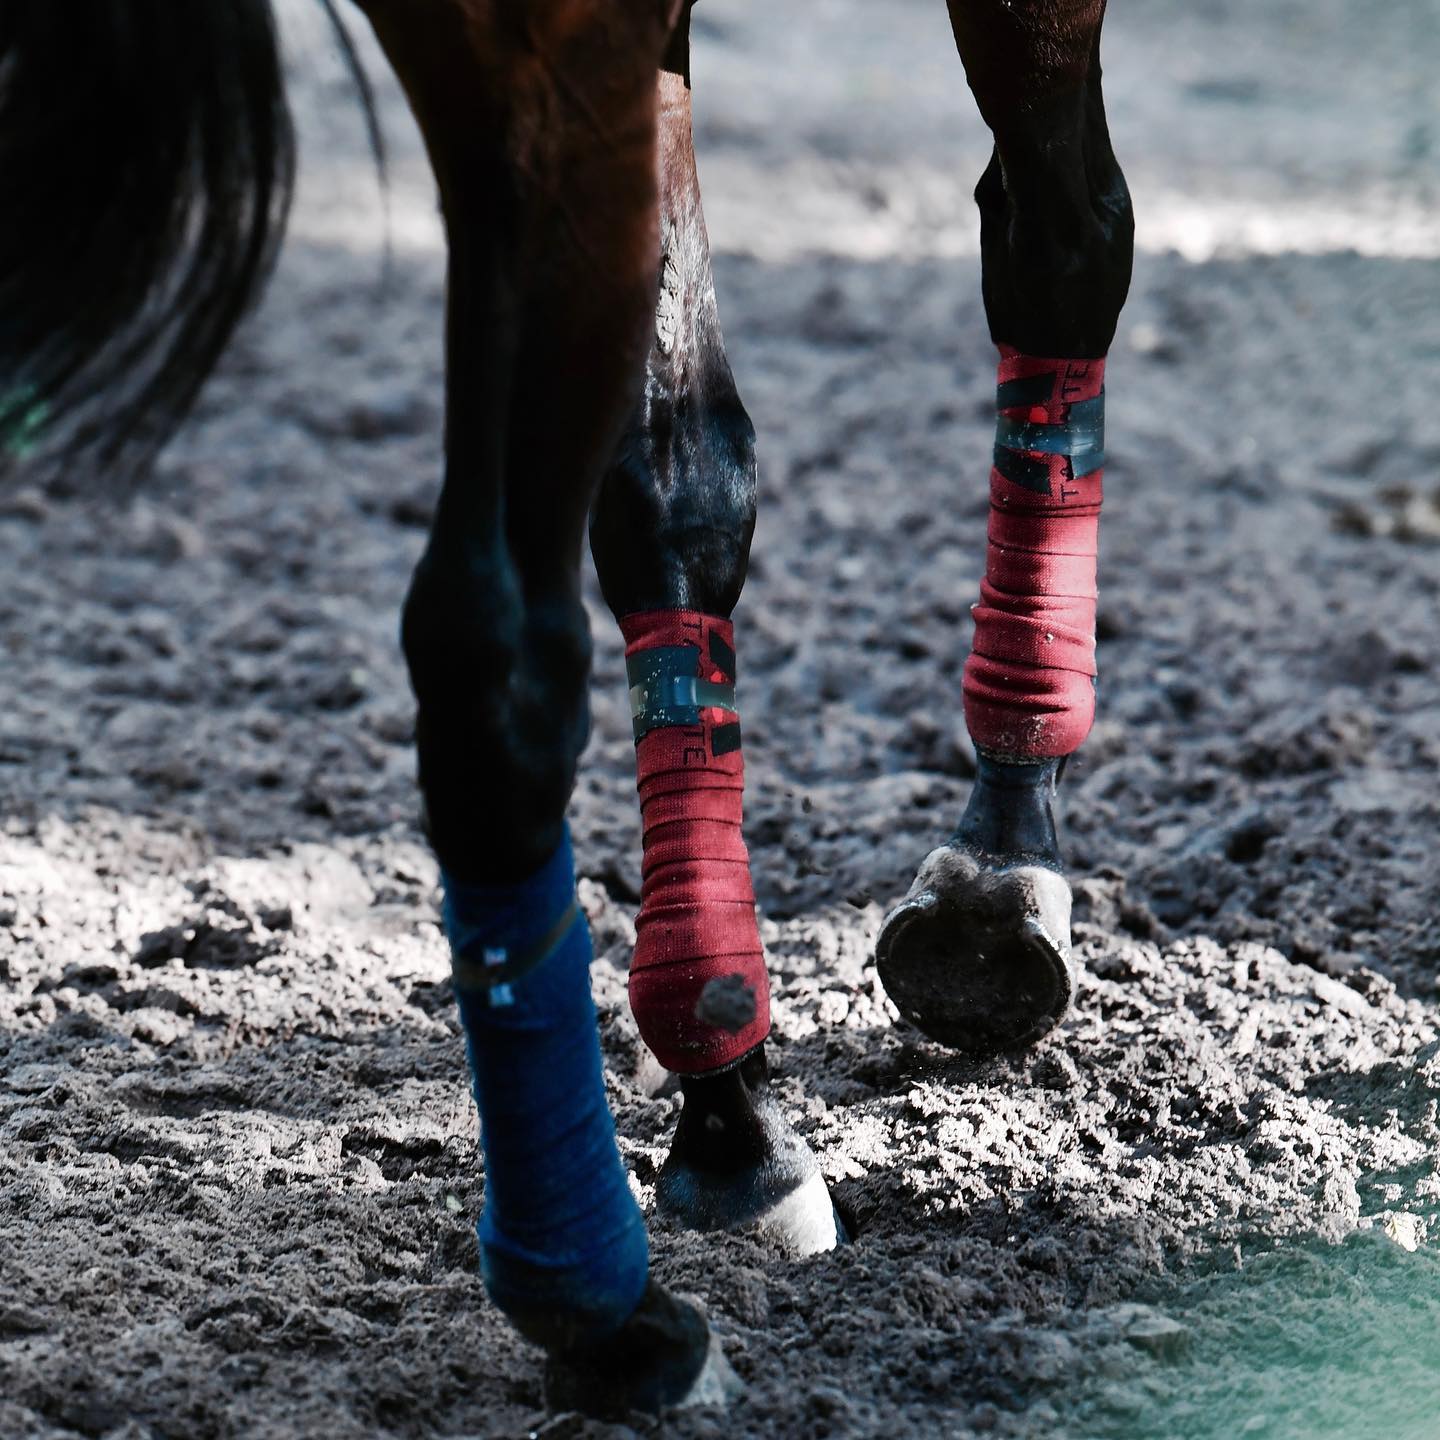 Step by step…
//
#tacante #bandage #madeinfrance🇫🇷 #rideandcare #knitting #horsecare #soinchevaldesport #bandesdepolo #equestrianequipment #tecycle #ecoresponsable♻️